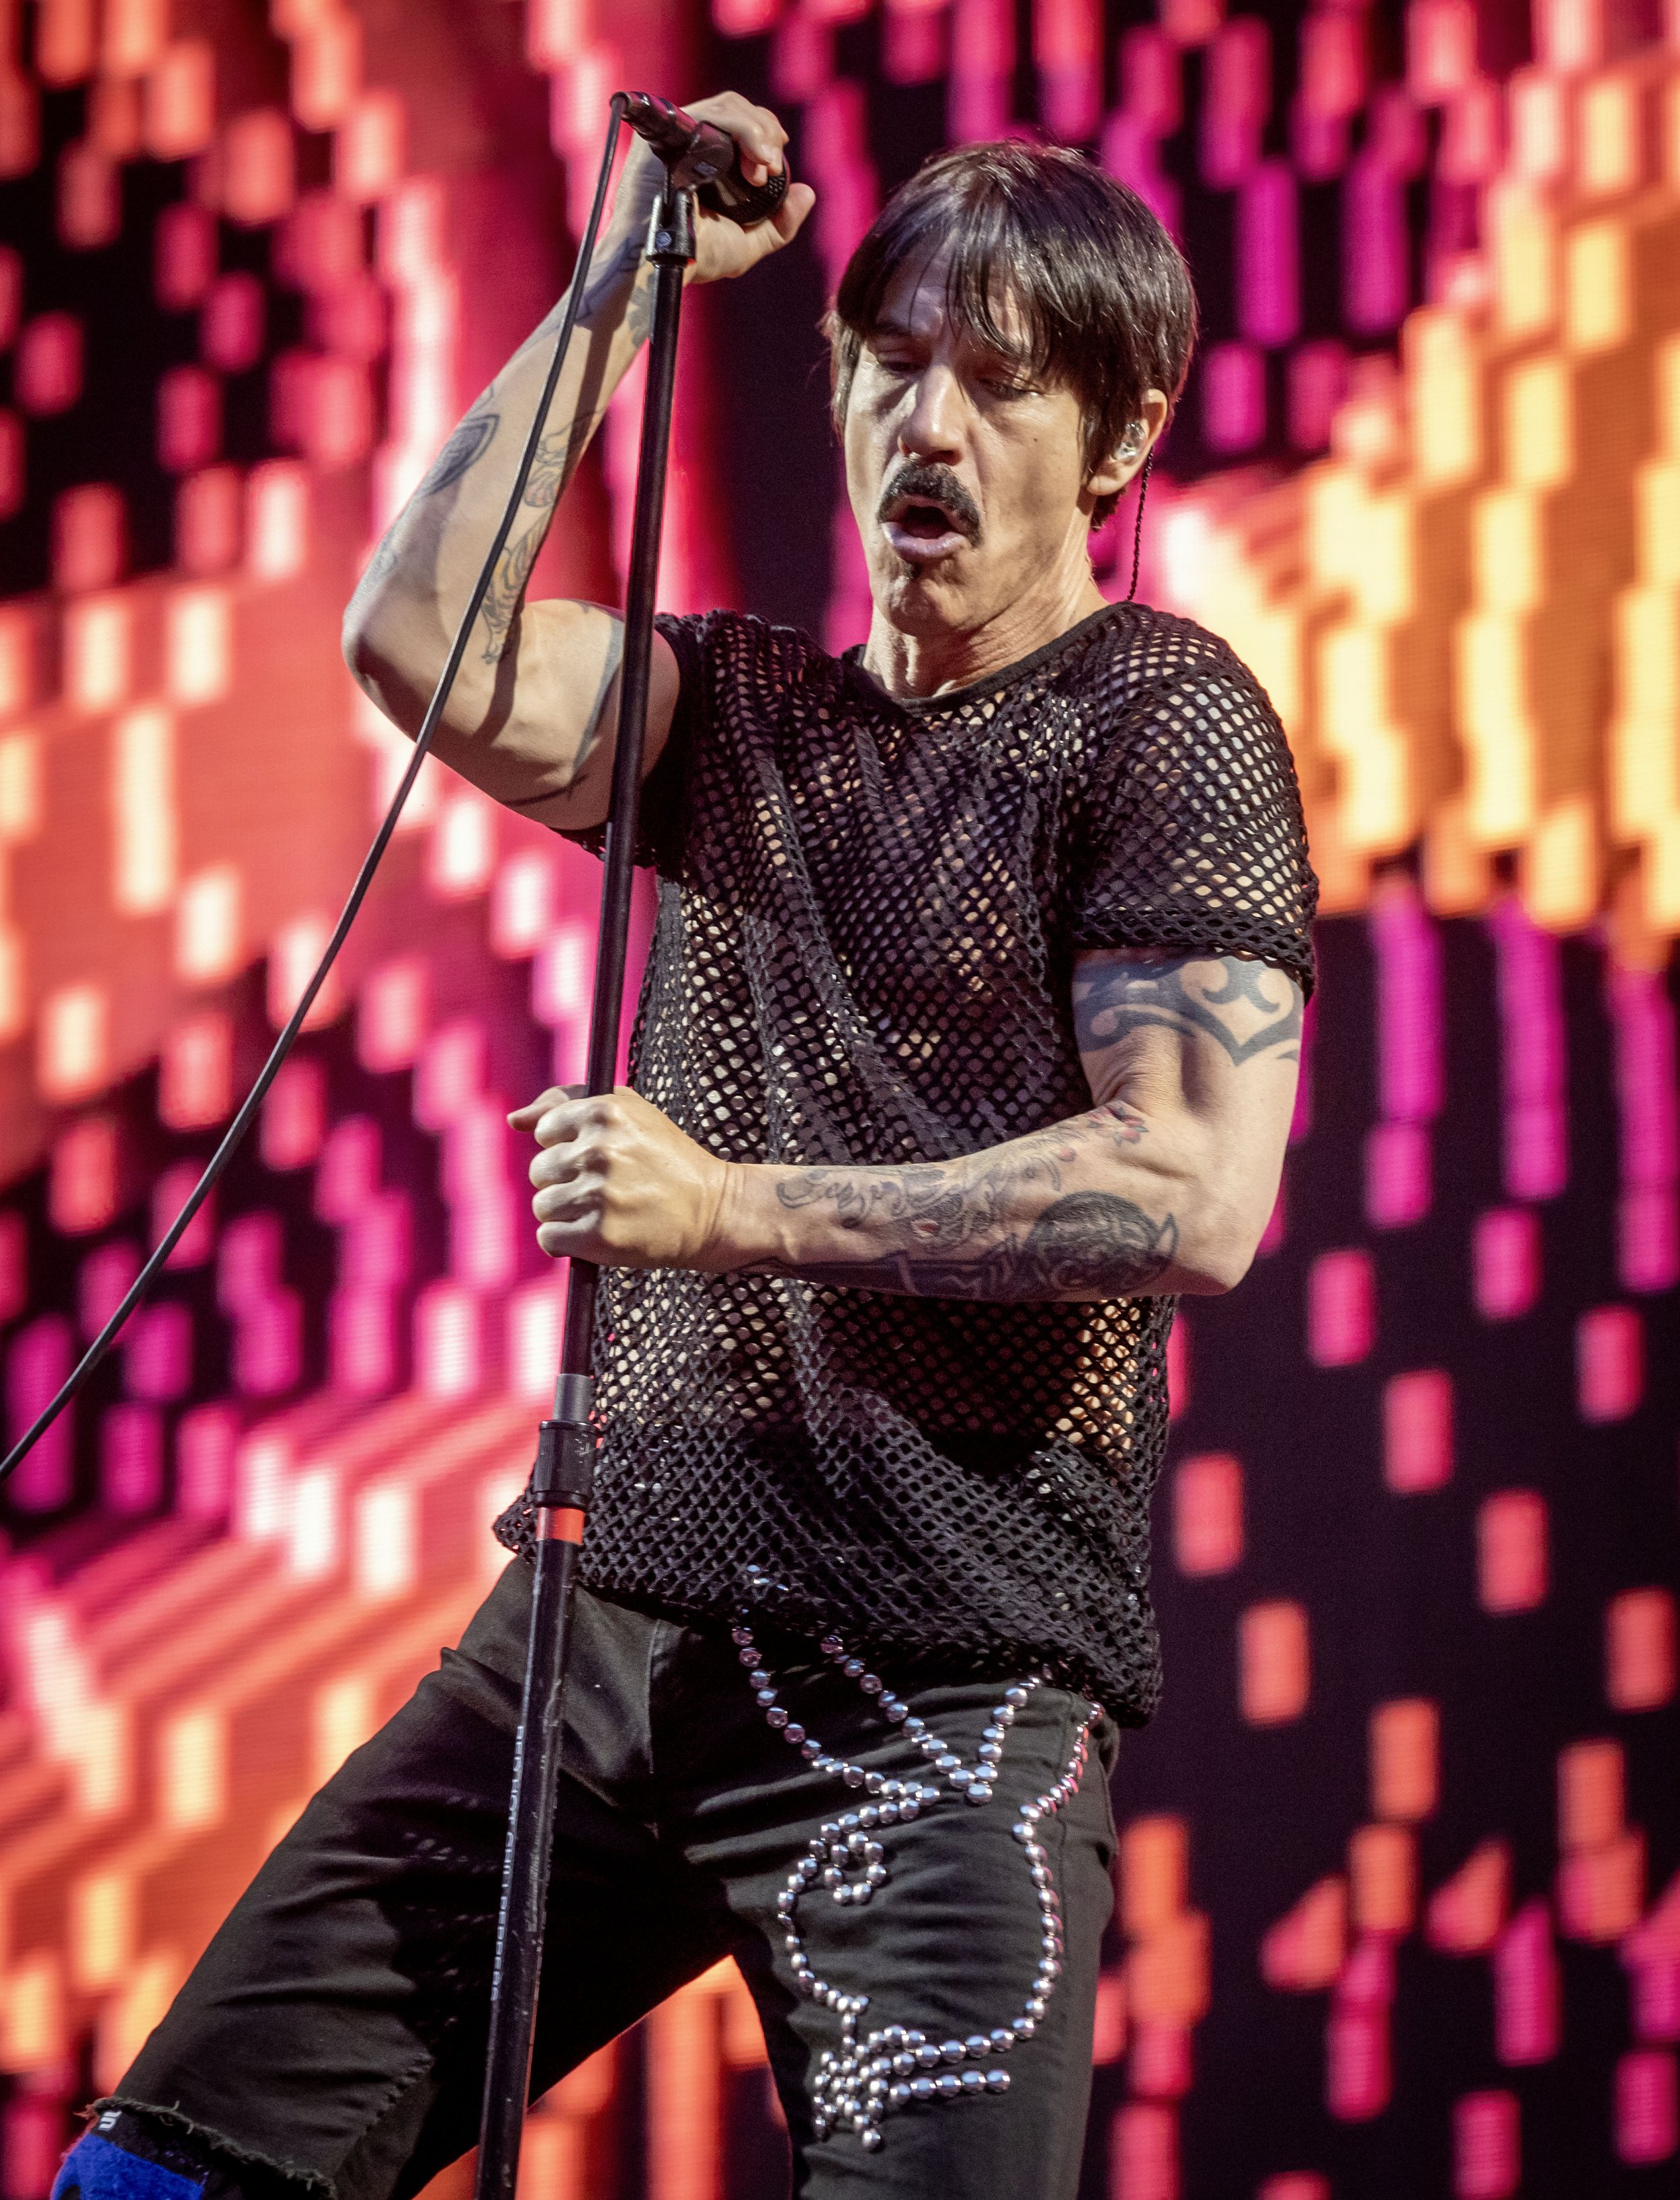 Anthony Kiedis of The Red Hot Chili Peppers